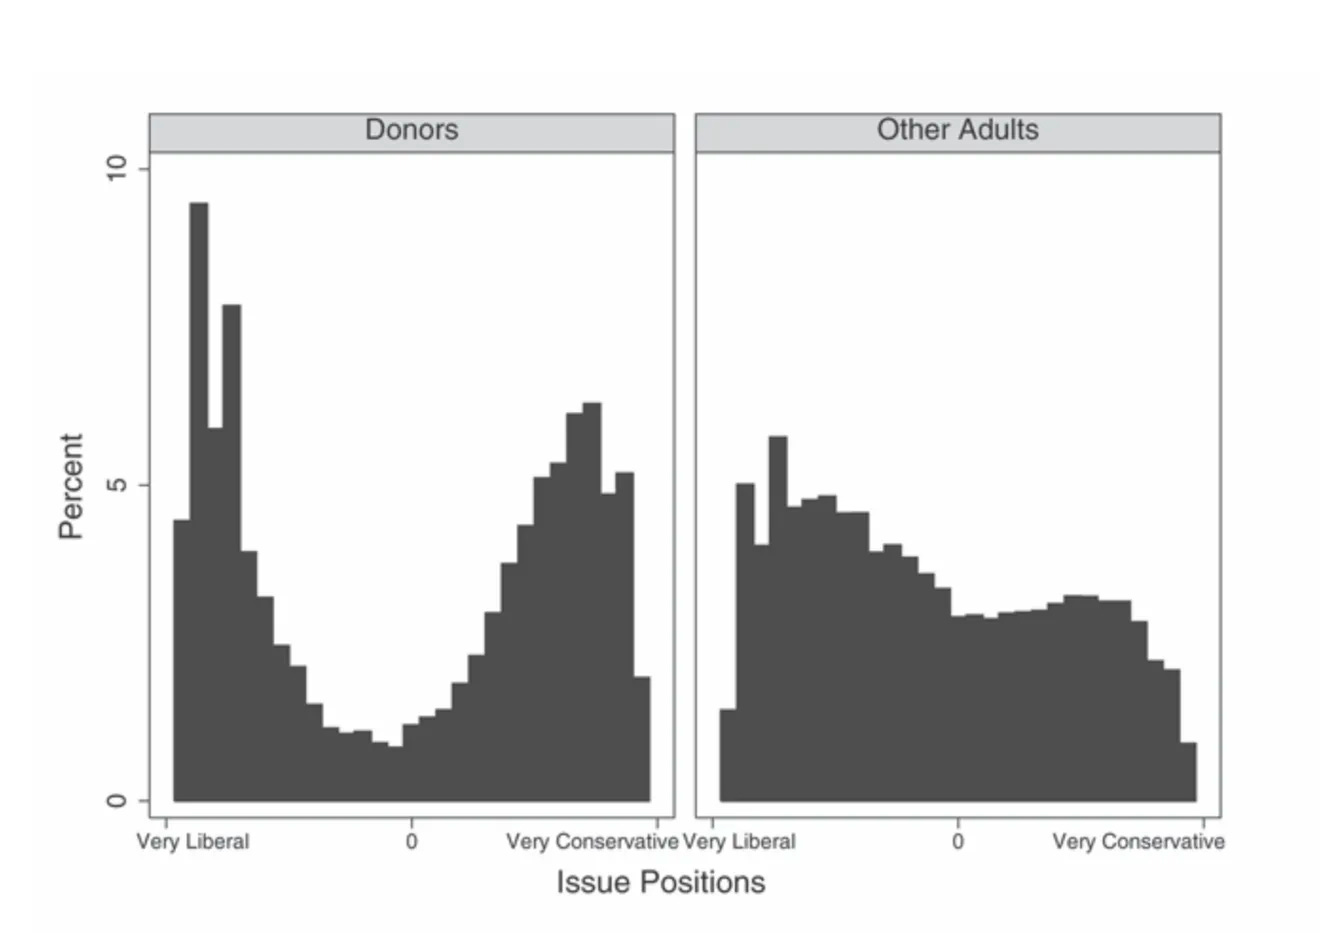 Graphs showing polarization of politics between political donors and non donors